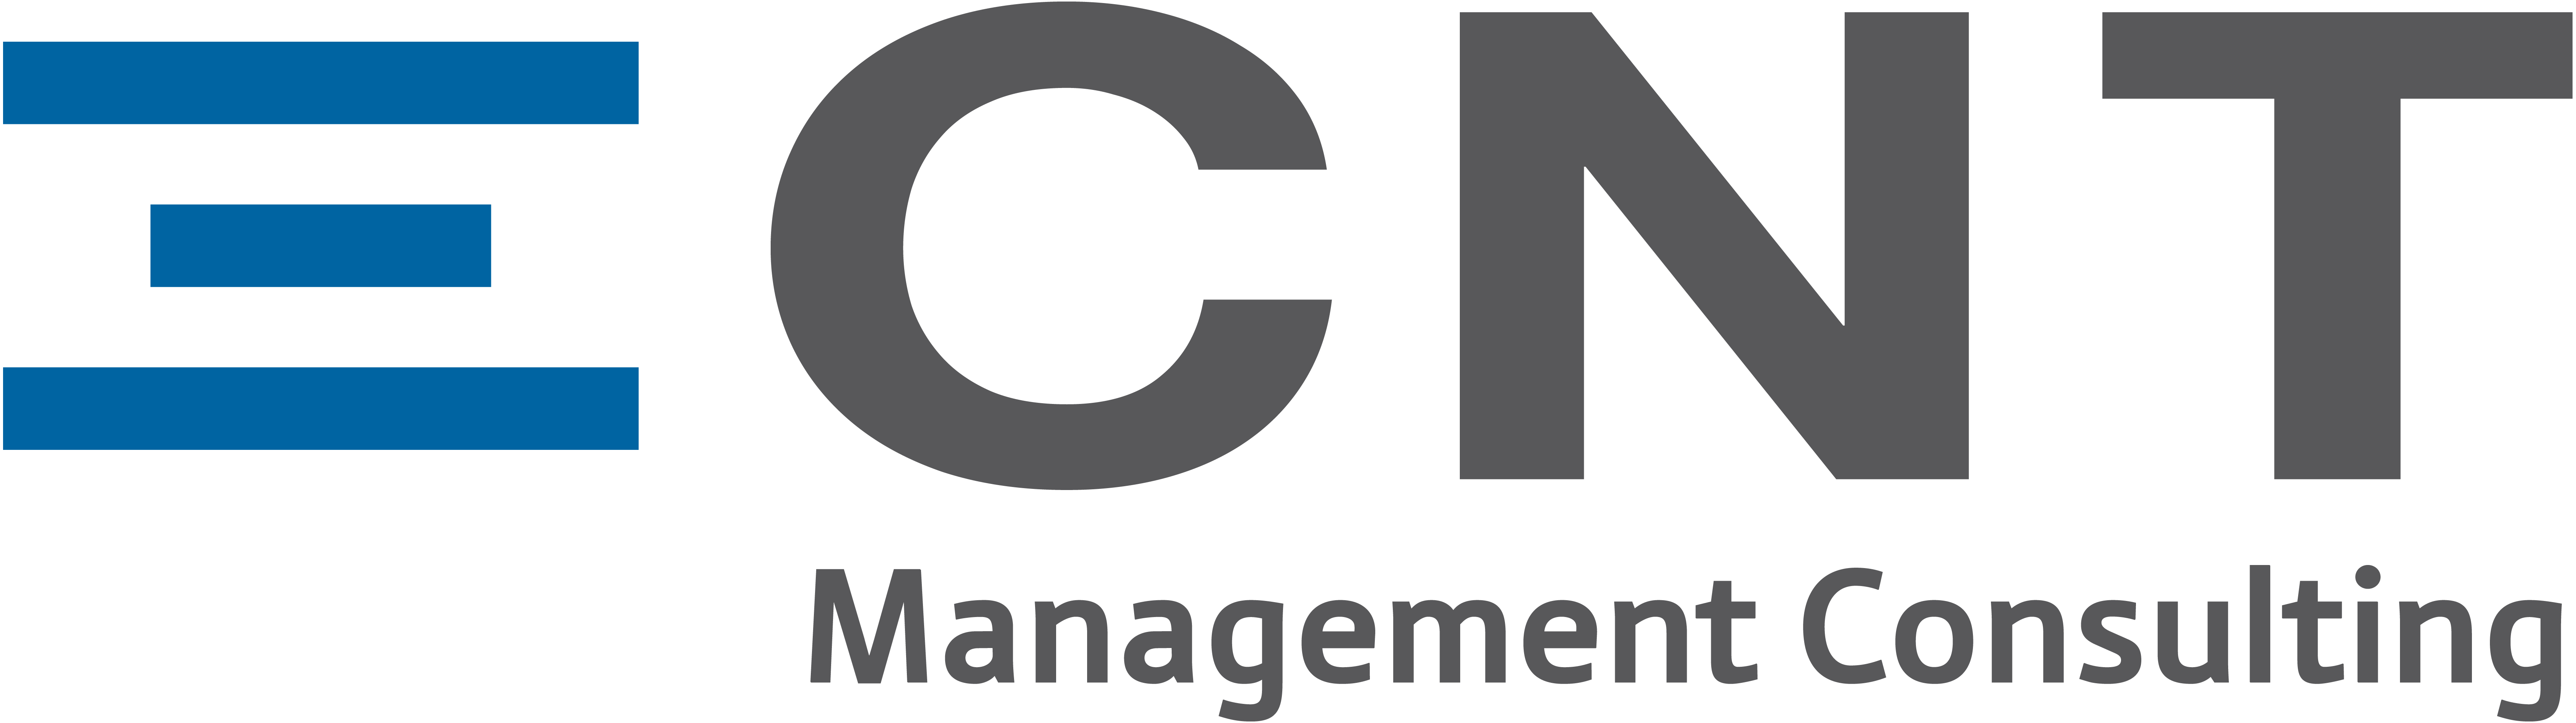 Cnt Logo - File:CNT Management Consulting Logo.png - Wikimedia Commons